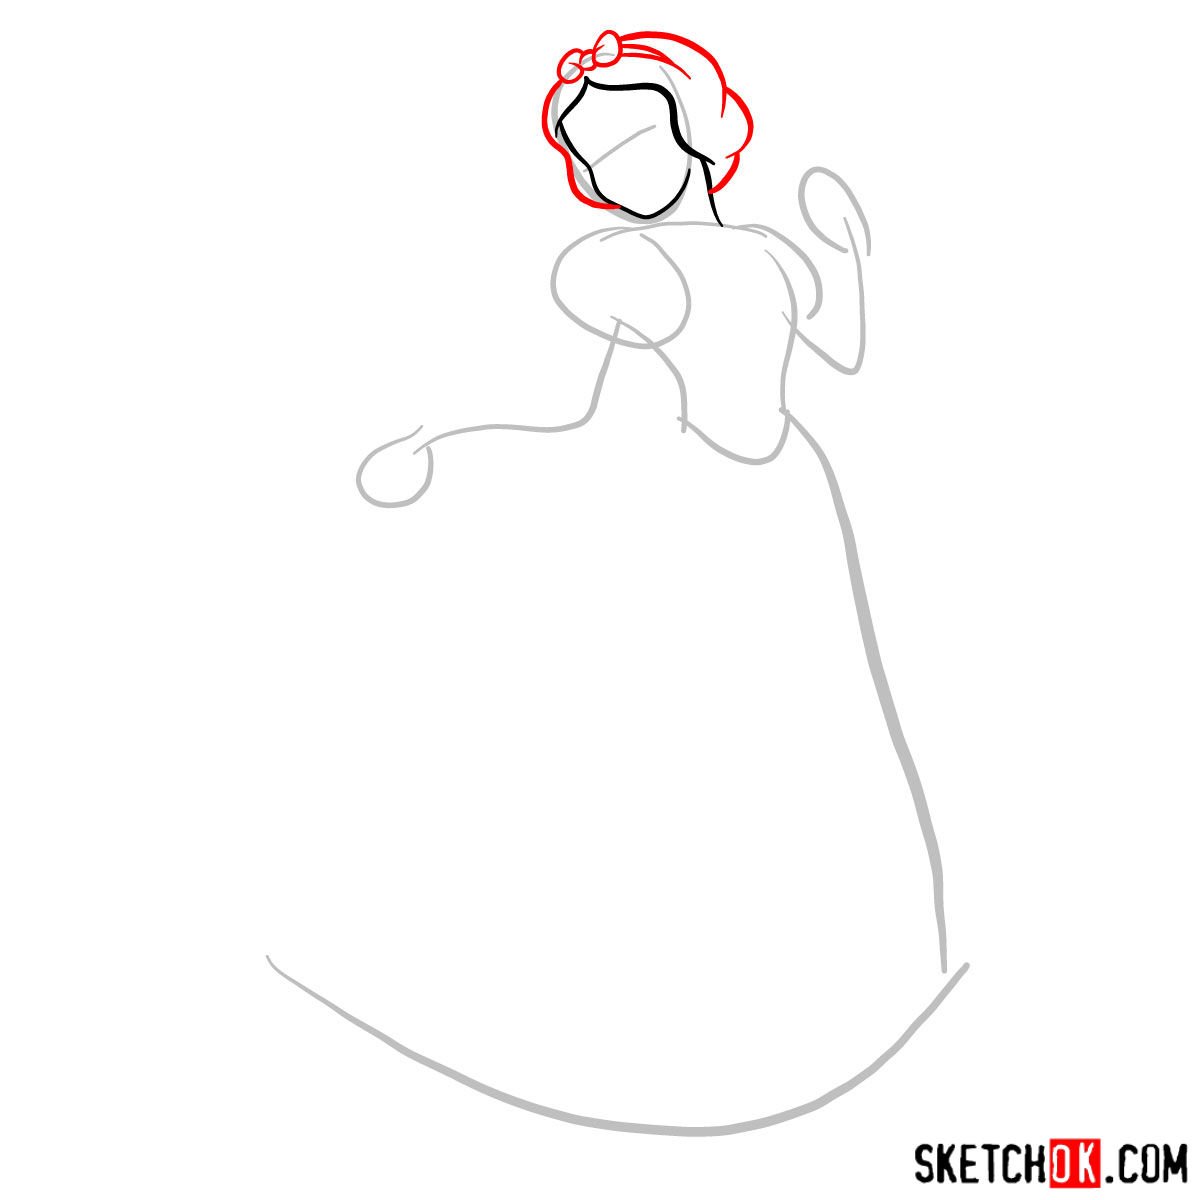 How to draw Snow White - step 03